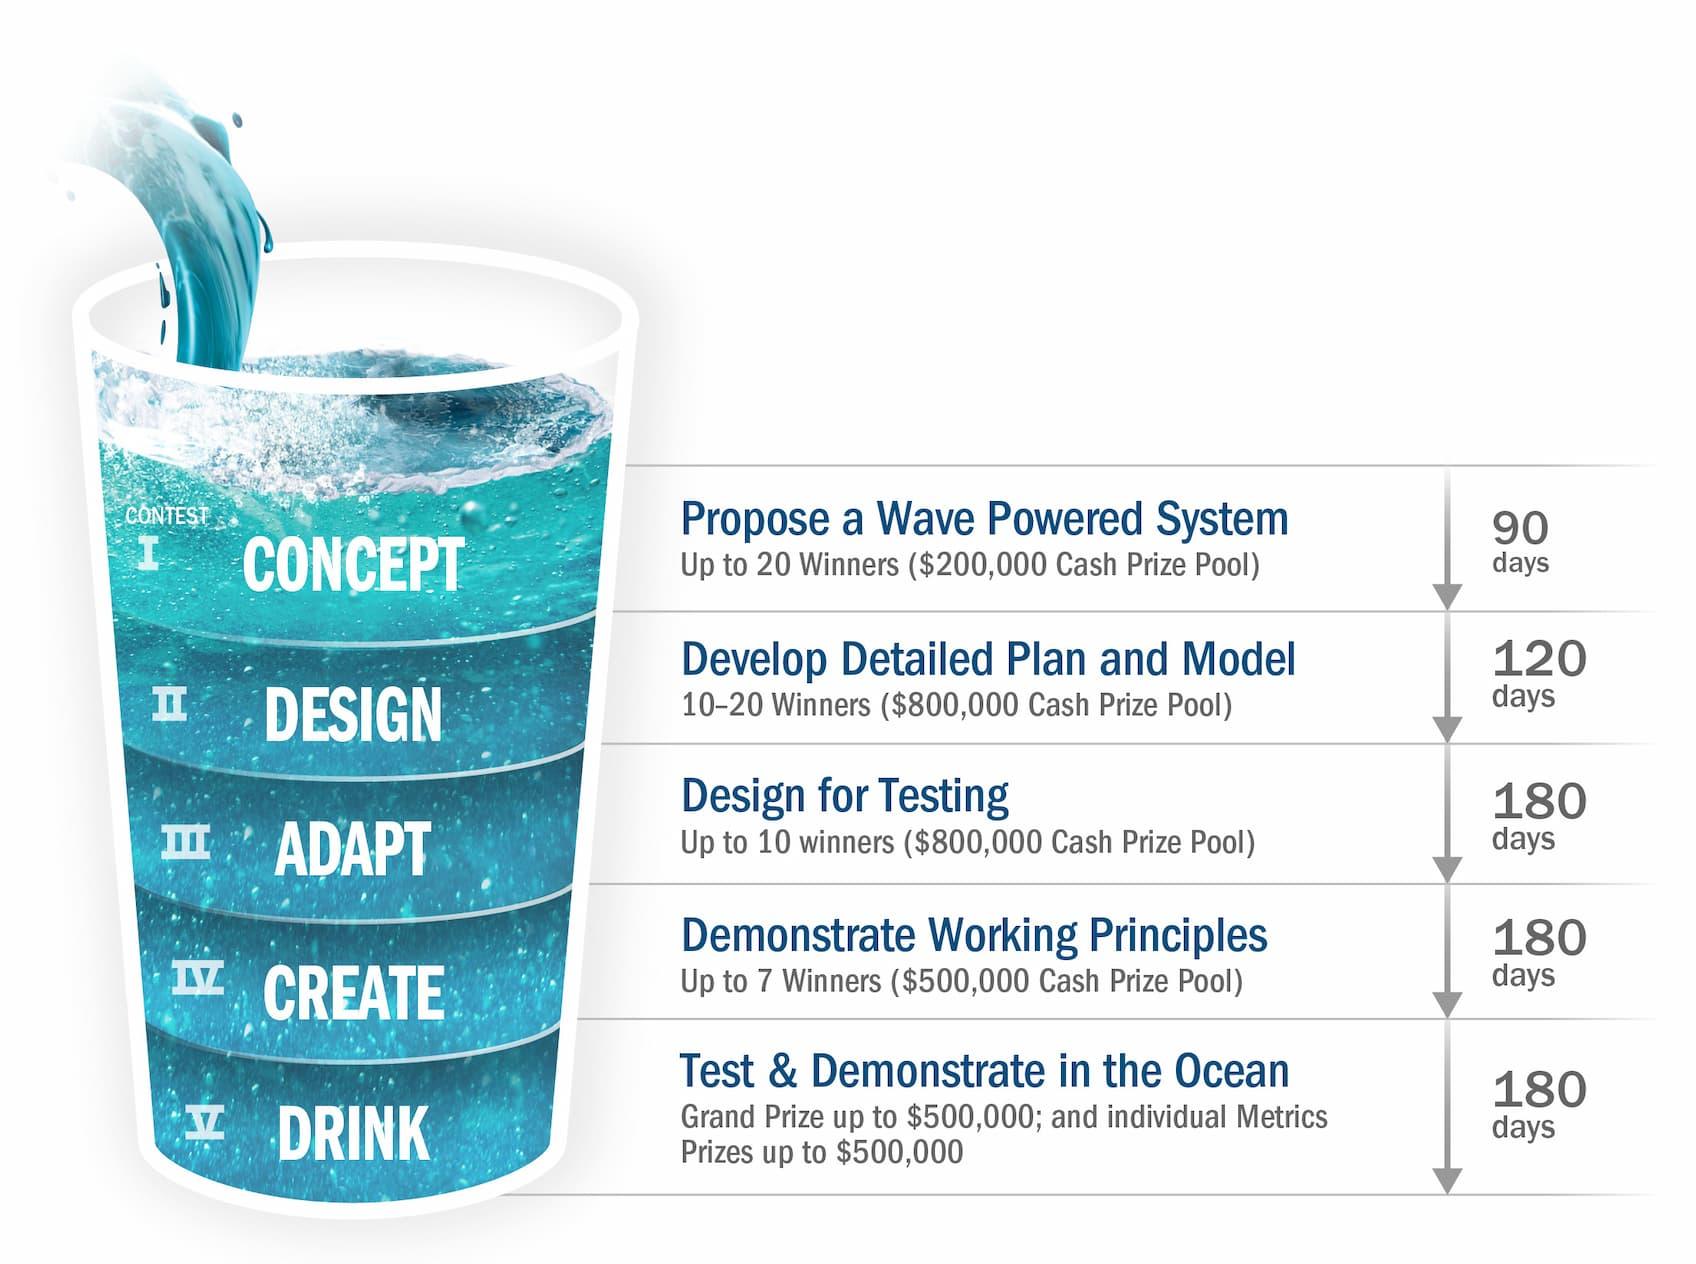 Graphic of the Waves to Water contest phases; Concept - propose a wave powered system, Design - develop detailed plan and model, Create - demonstrate working principles, and Drink - test & demonstrate in the ocean.